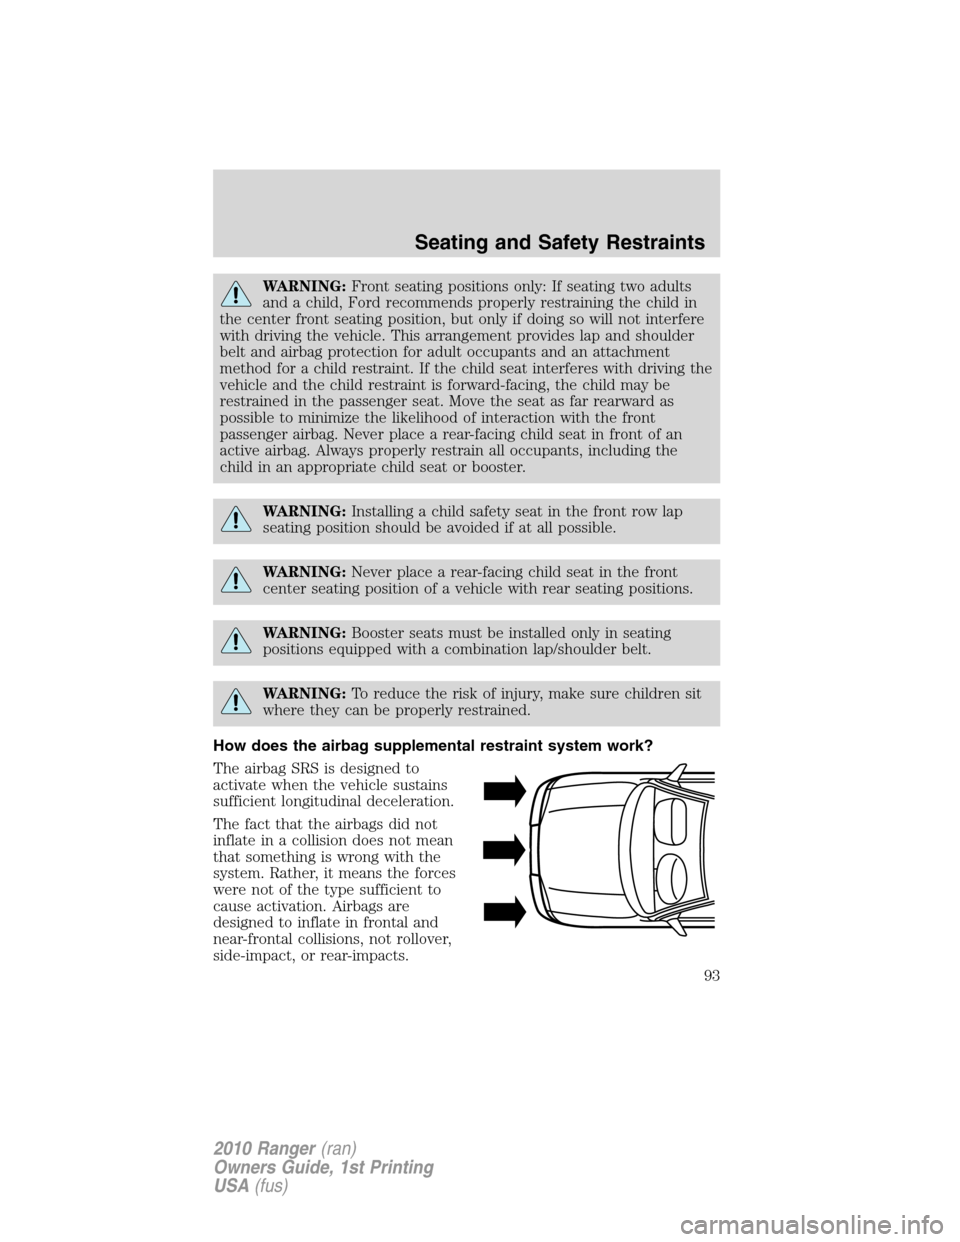 FORD RANGER 2010 2.G User Guide WARNING:Front seating positions only: If seating two adults
and a child, Ford recommends properly restraining the child in
the center front seating position, but only if doing so will not interfere
wi